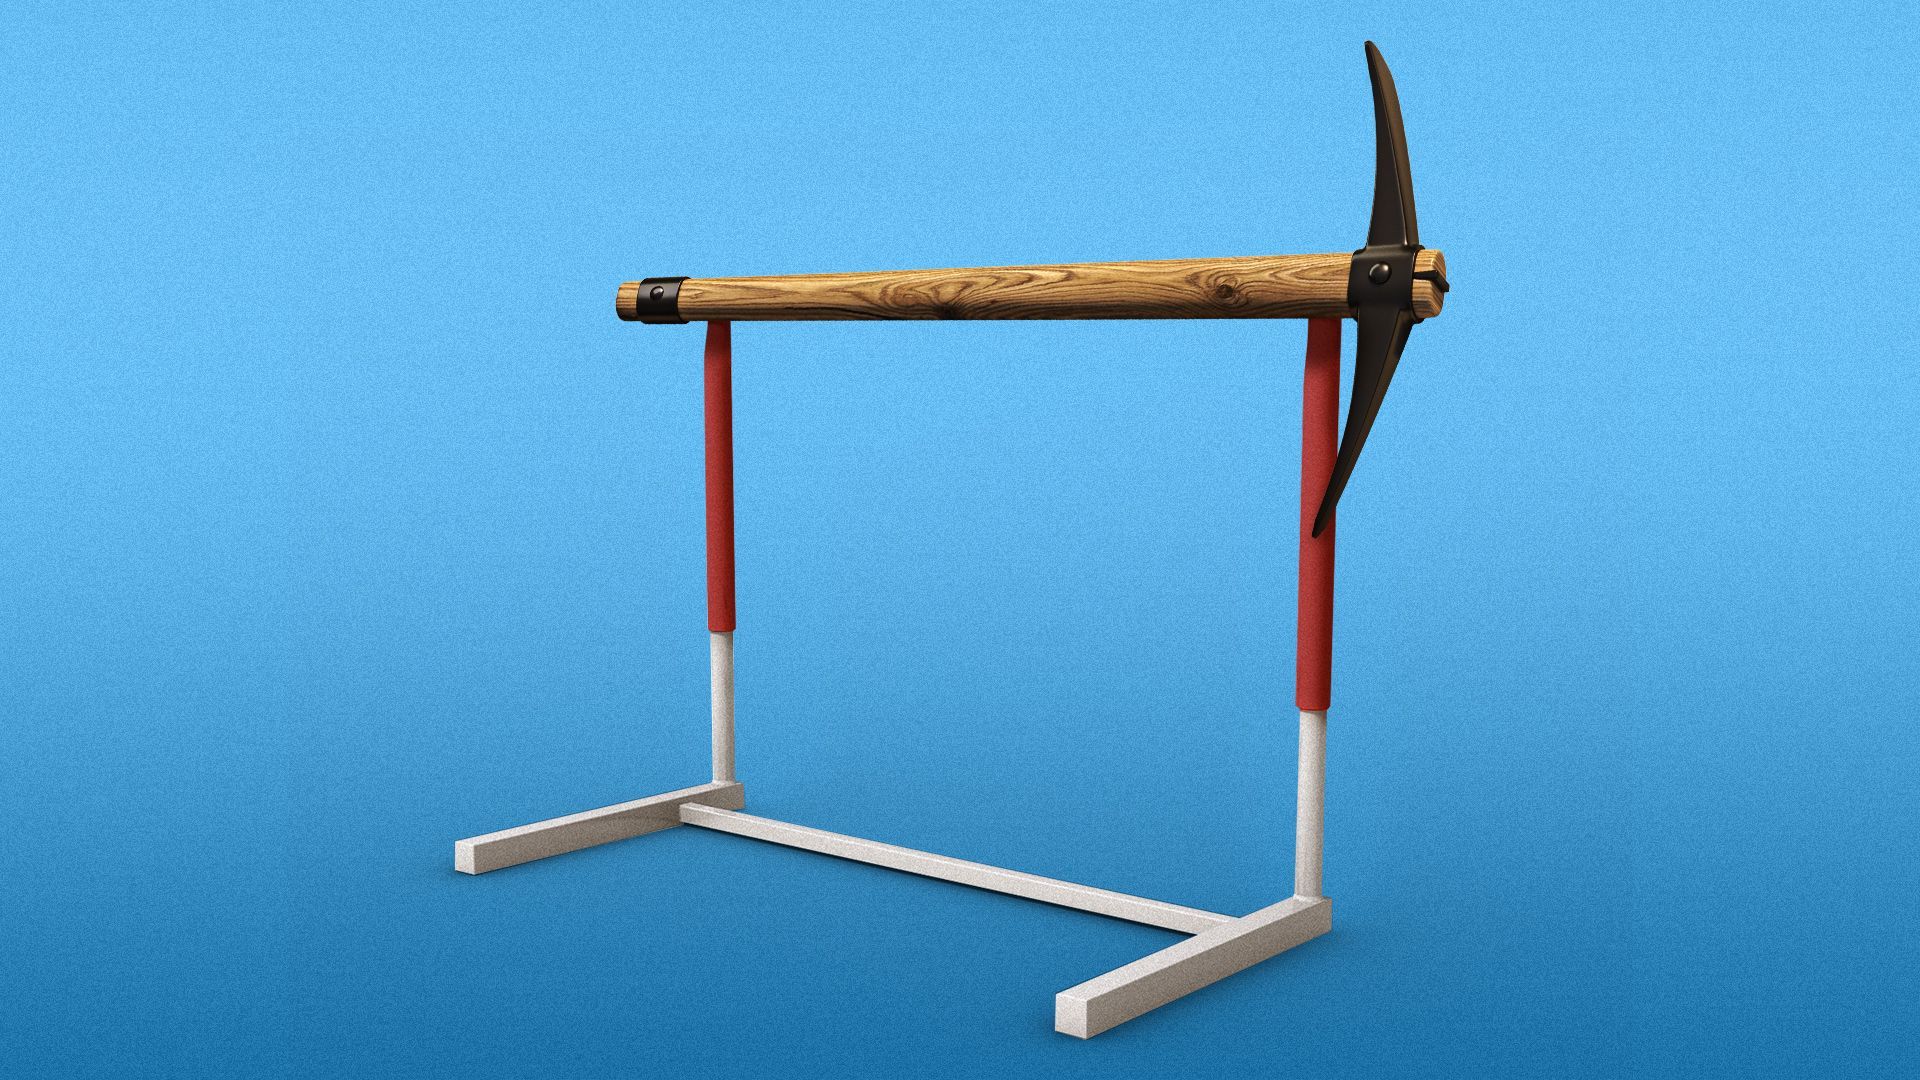 Illustration of a hurdle with a pick axe as the bar.